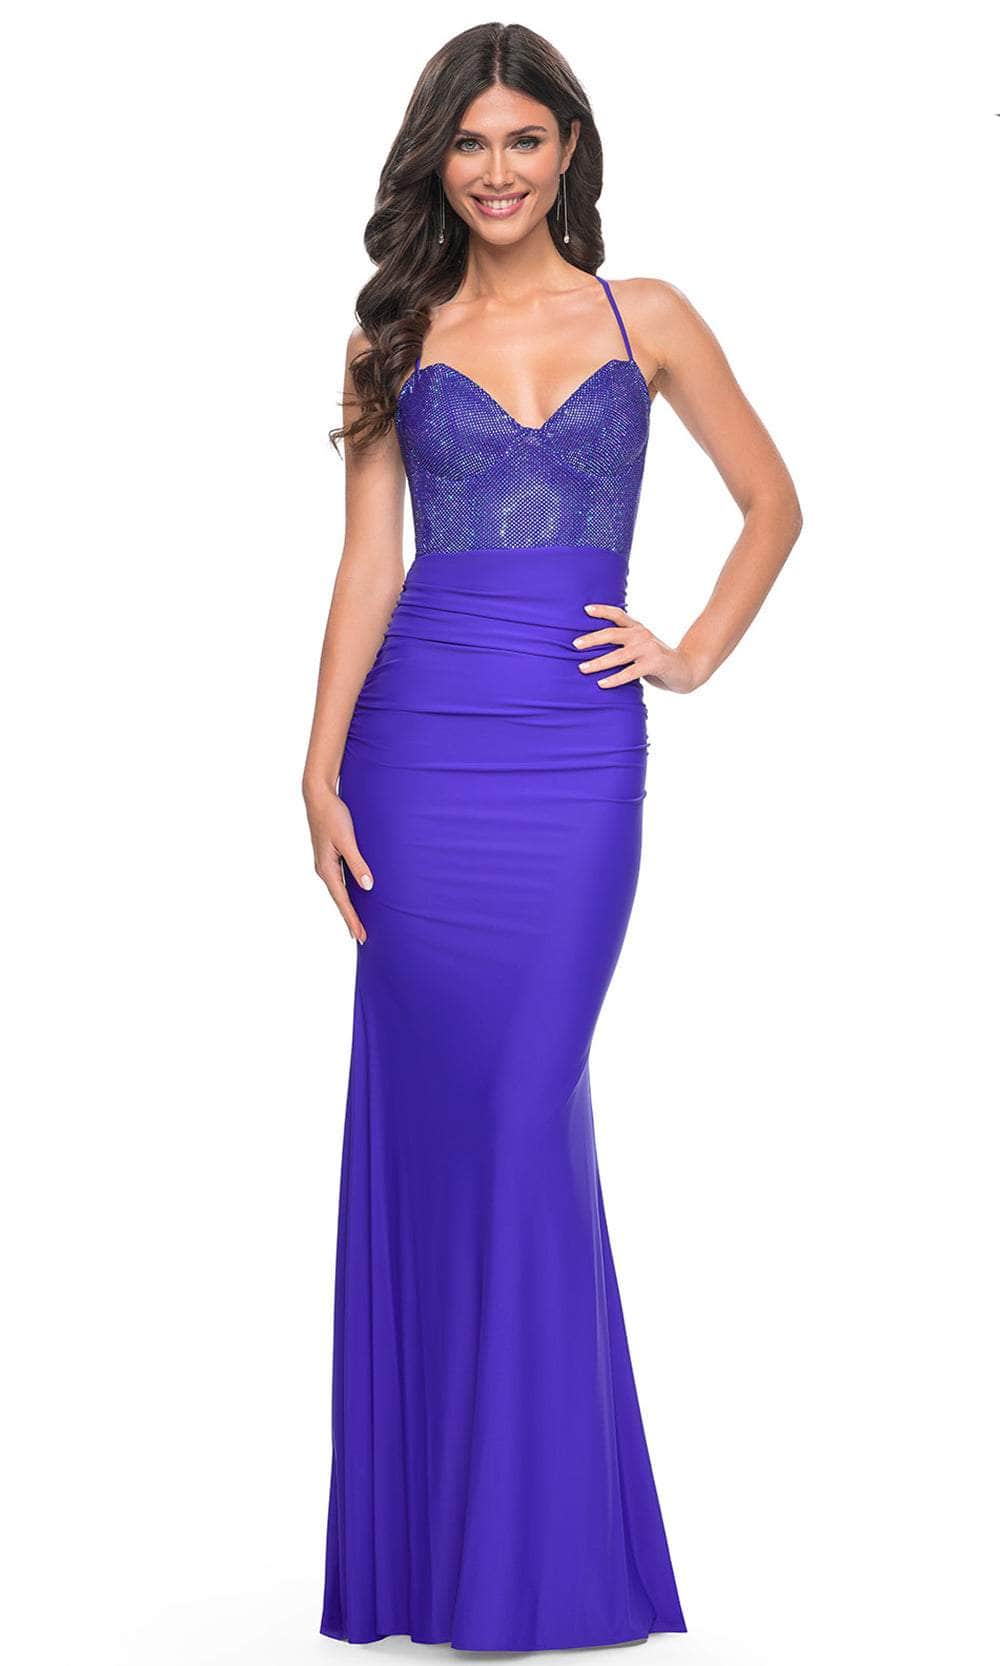 La Femme 32260 - Lace-Up Back Ruched Prom Gown Formal Gowns 00 / Royal Blue